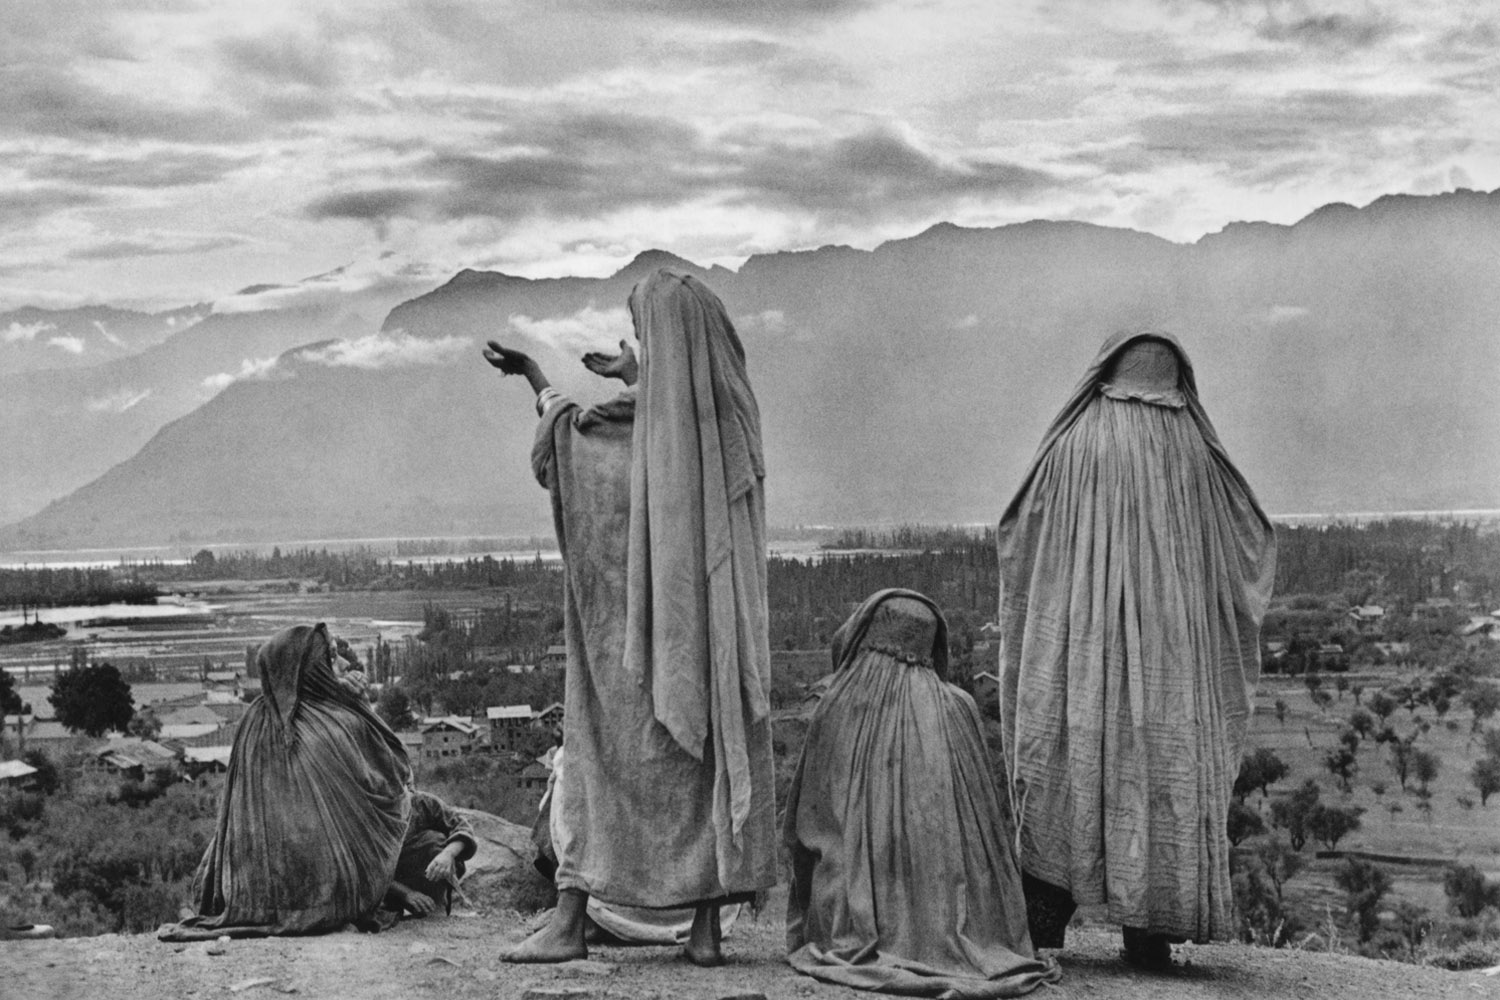 INDIA. Kashmir. Srinagar. 1948. Muslim women on the slopes of Hari Parbal Hill, praying toward the sun rising behind the Himalayas. Contact email:New York : photography@magnumphotos.comParis : magnum@magnumphotos.frLondon : magnum@magnumphotos.co.ukTokyo : tokyo@magnumphotos.co.jpContact phones:New York : +1 212 929 6000Paris: + 33 1 53 42 50 00London: + 44 20 7490 1771Tokyo: + 81 3 3219 0771Image URL:http://www.magnumphotos.com/Archive/C.aspx?VP3=ViewBox_VPage&IID=2S5RYDI03U5H&CT=Image&IT=ZoomImage01_VForm